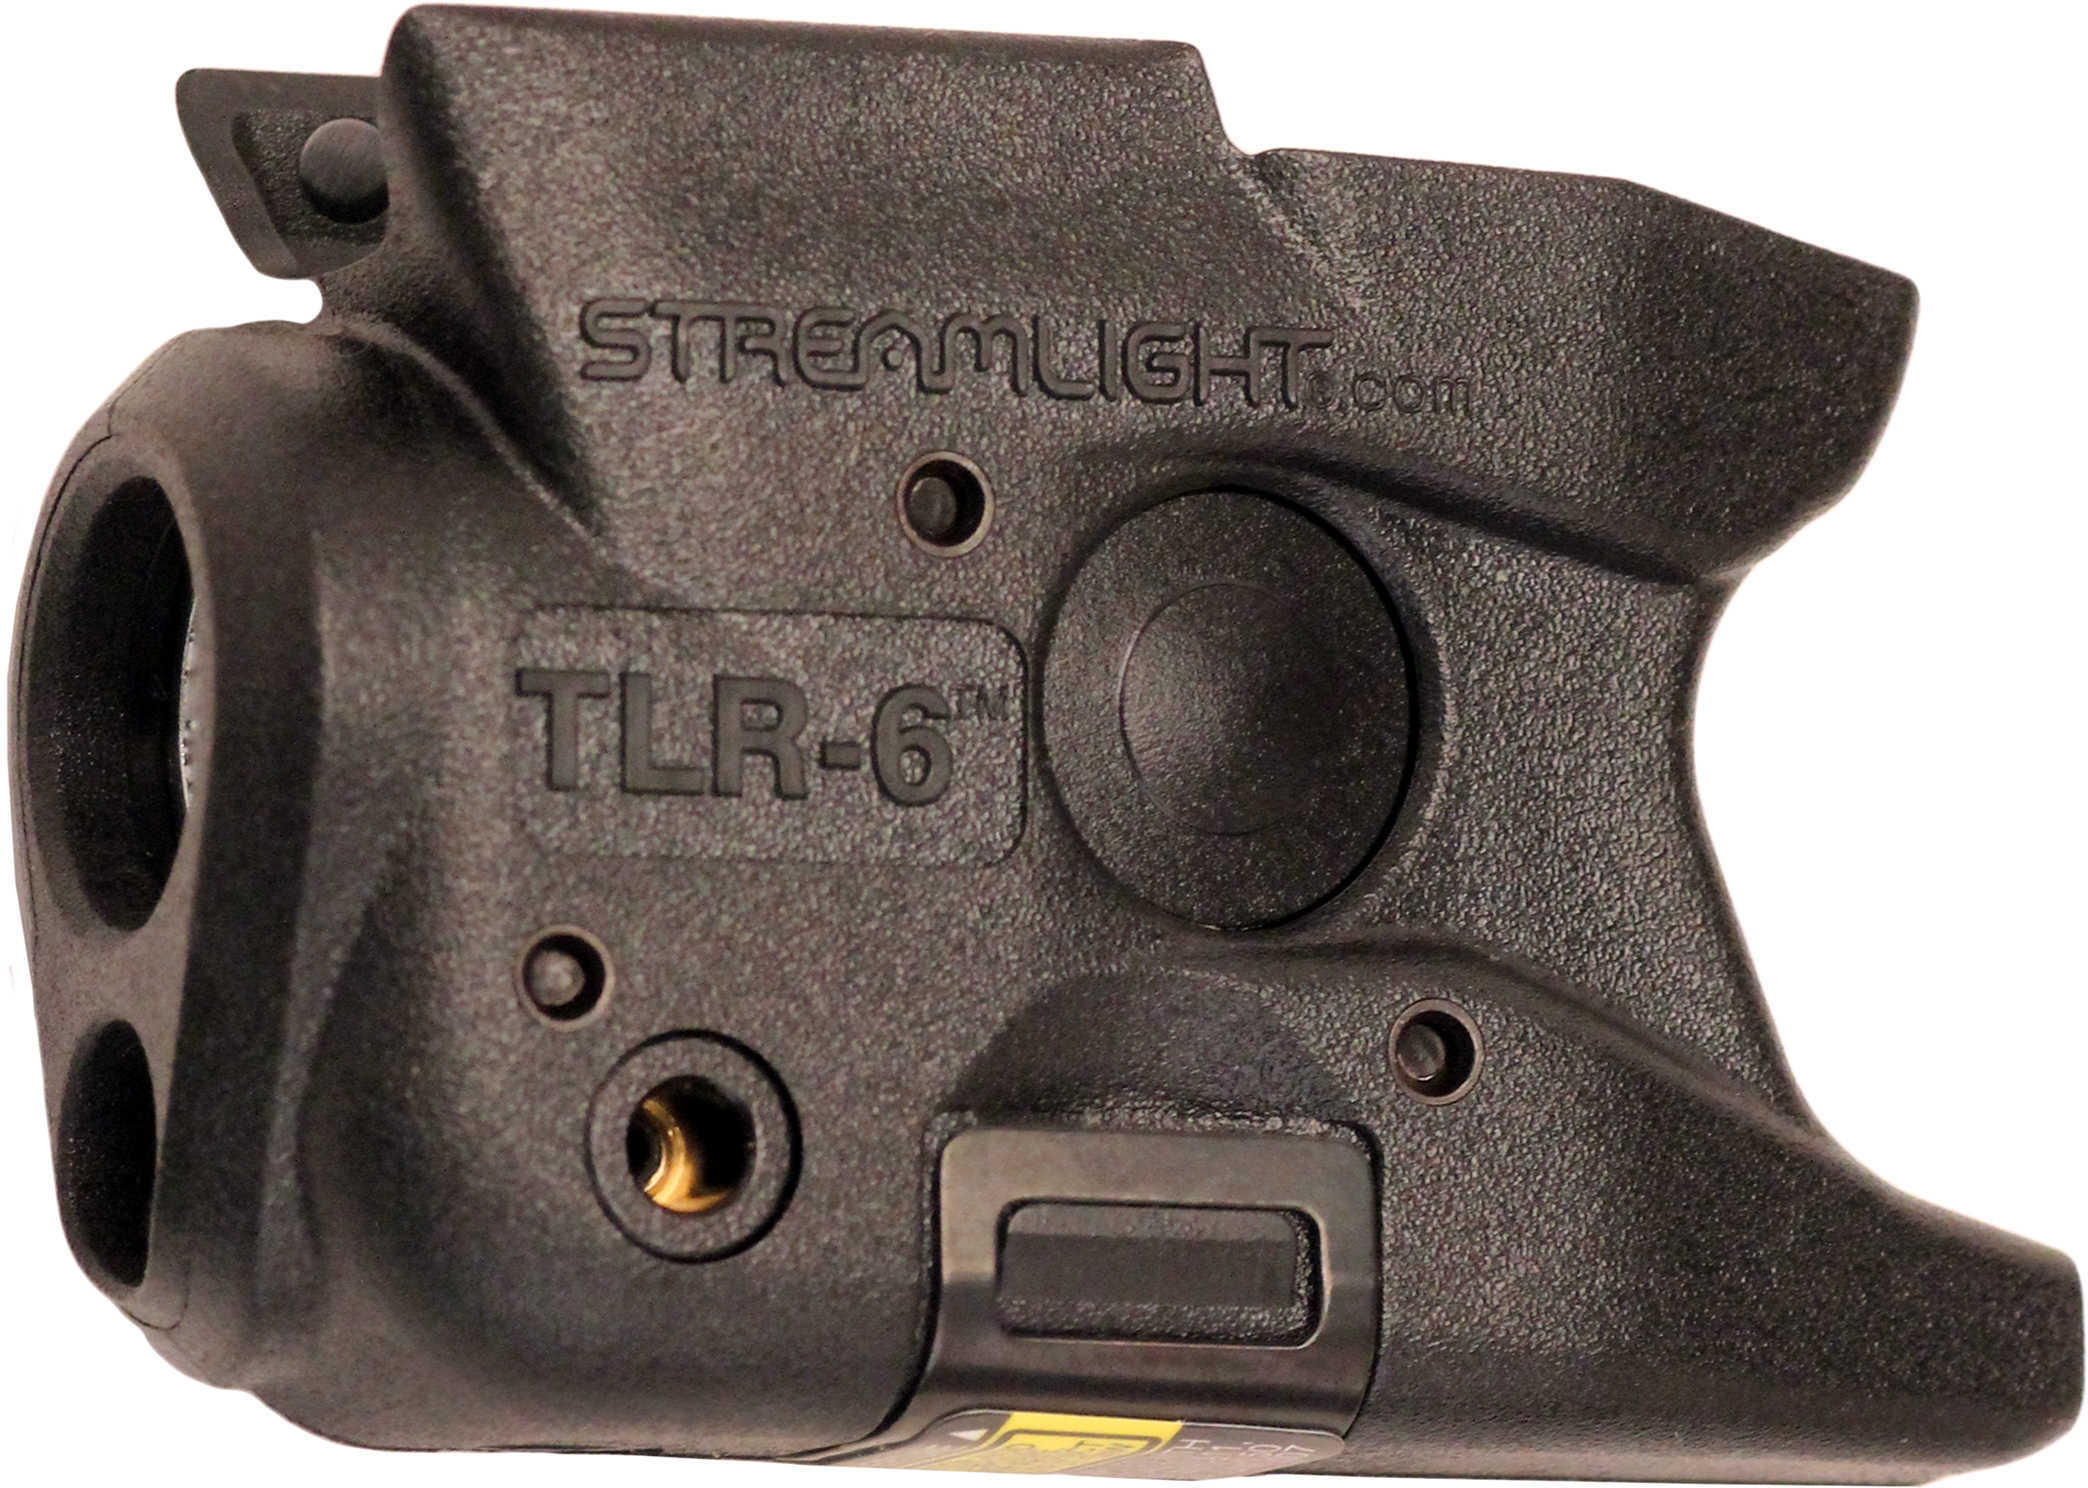 Streamlight Subcompact Gun-Mounted Tactical Light With Integrated Red Aiming Laser For M&P Shield Md: 69273